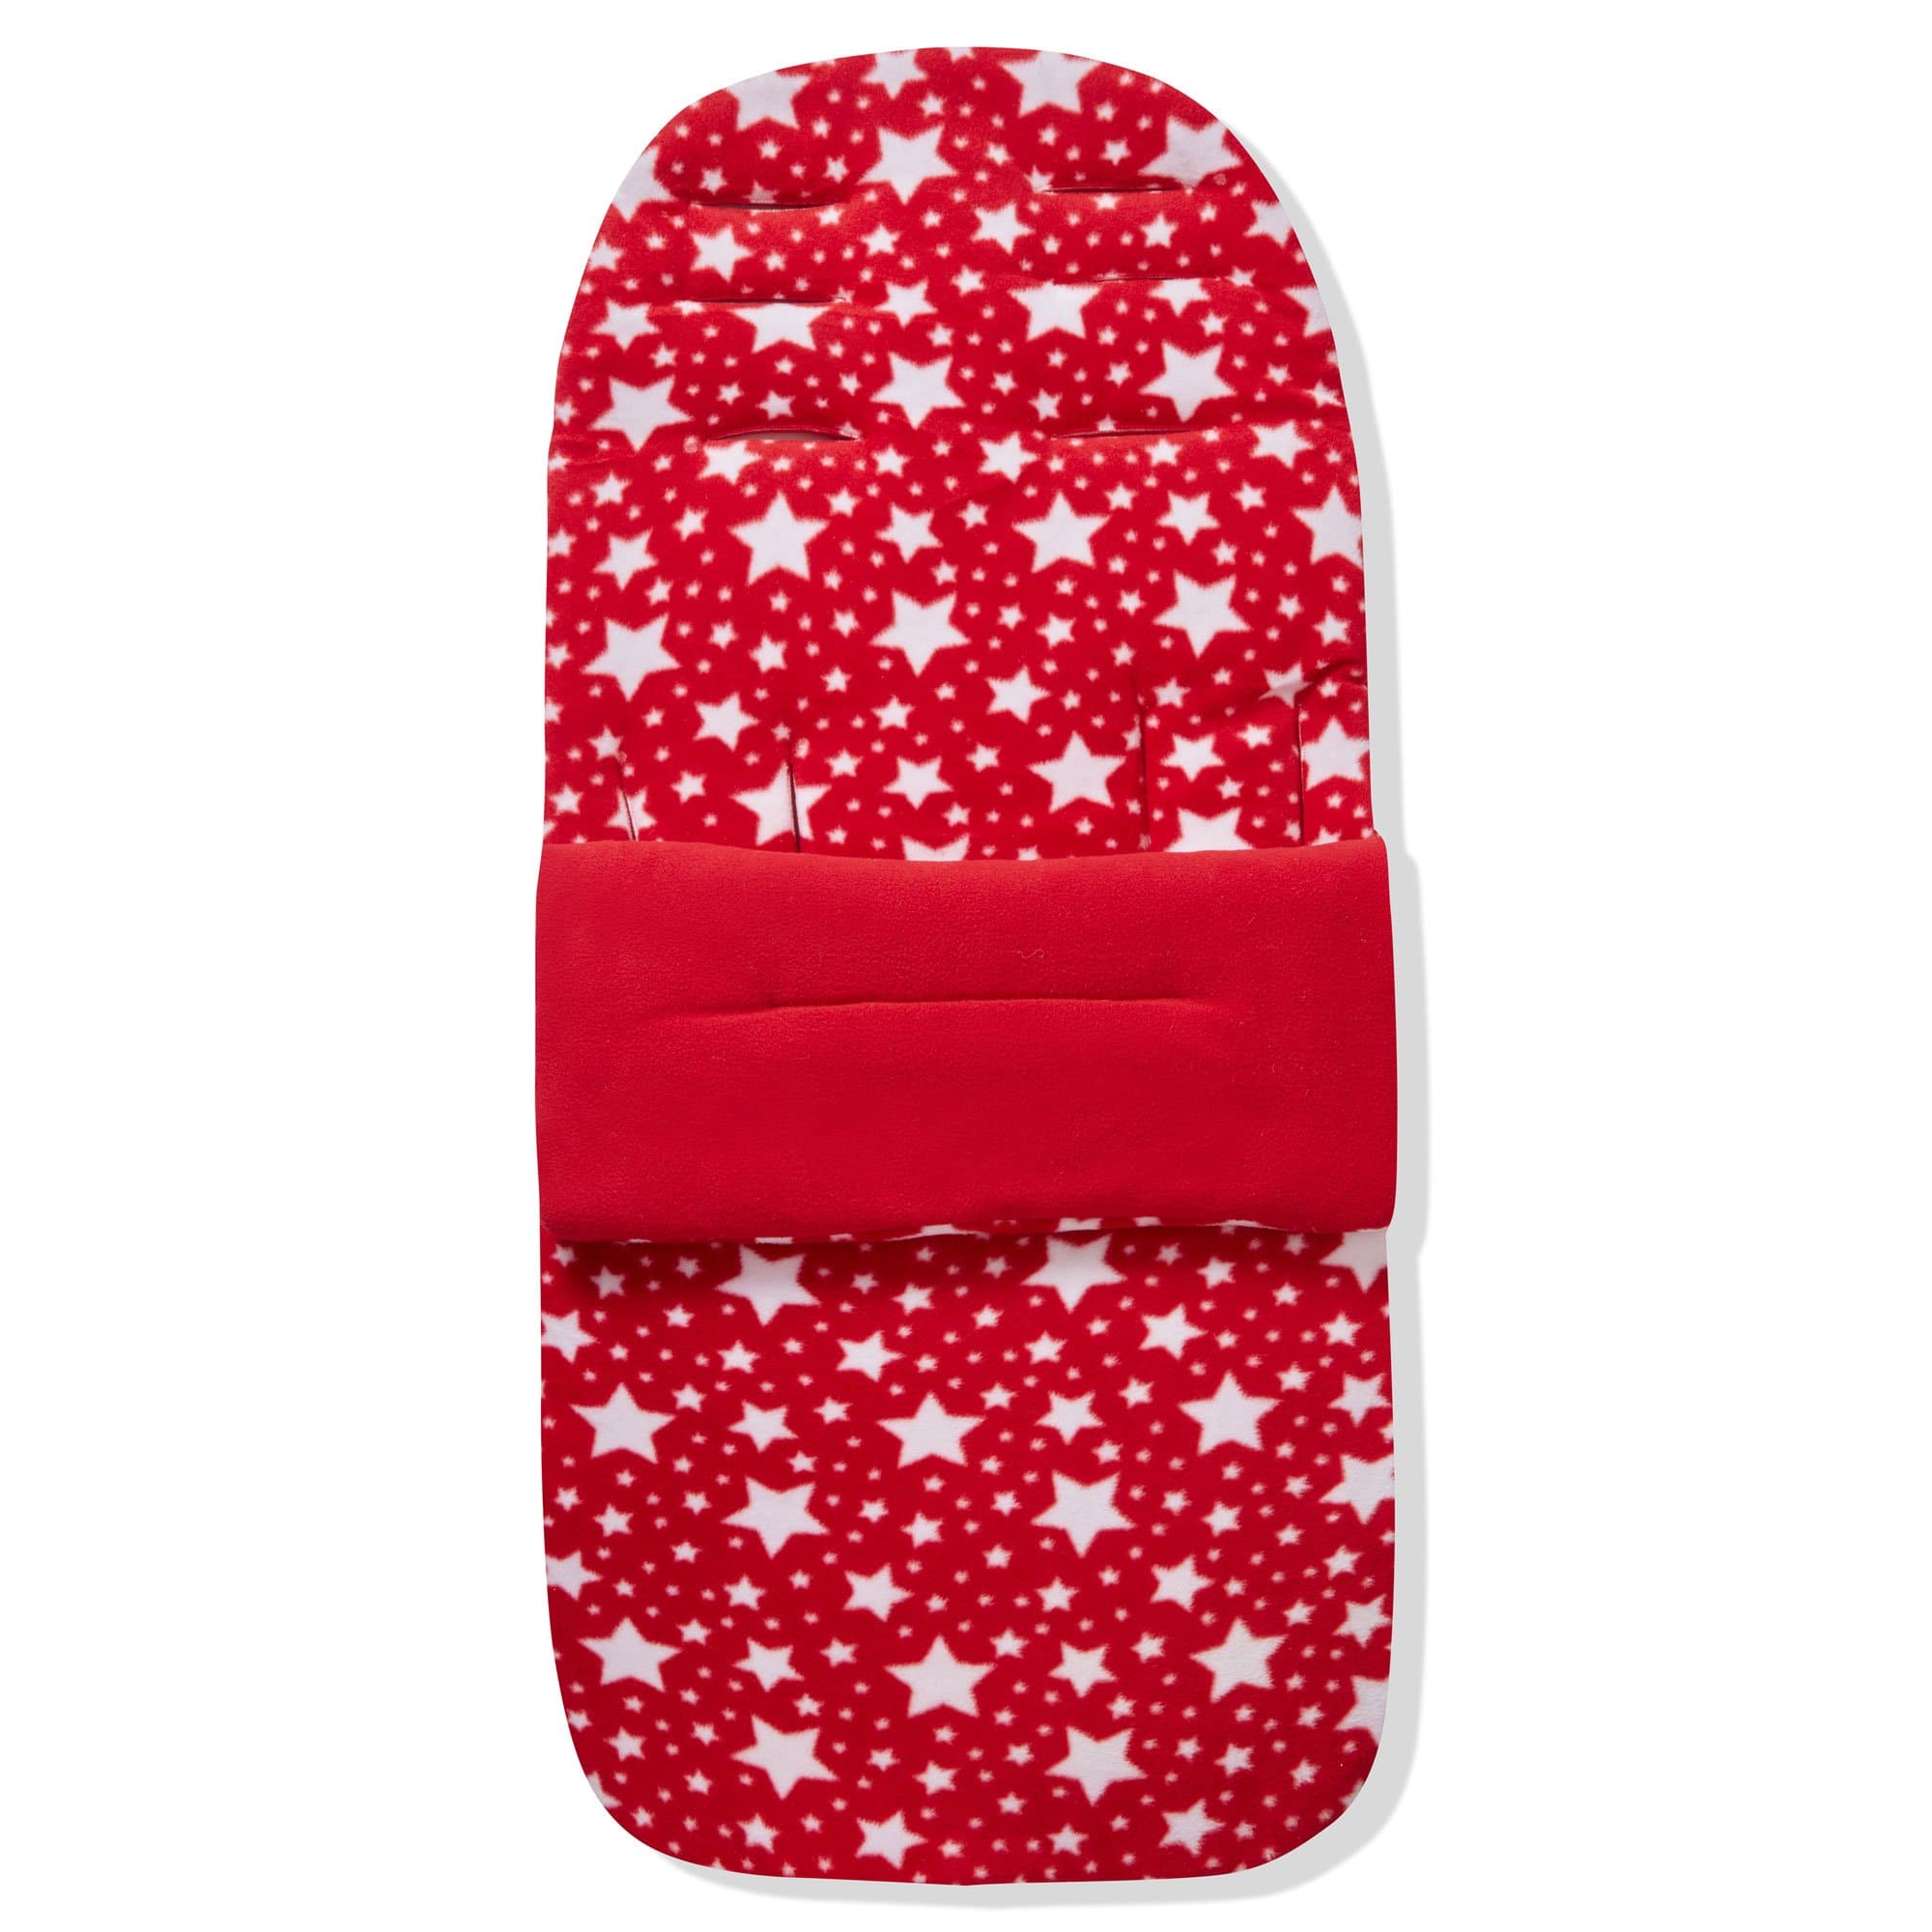 Fleece Footmuff / Cosy Toes Compatible With Easywalker - Red Star / Fits All Models | For Your Little One